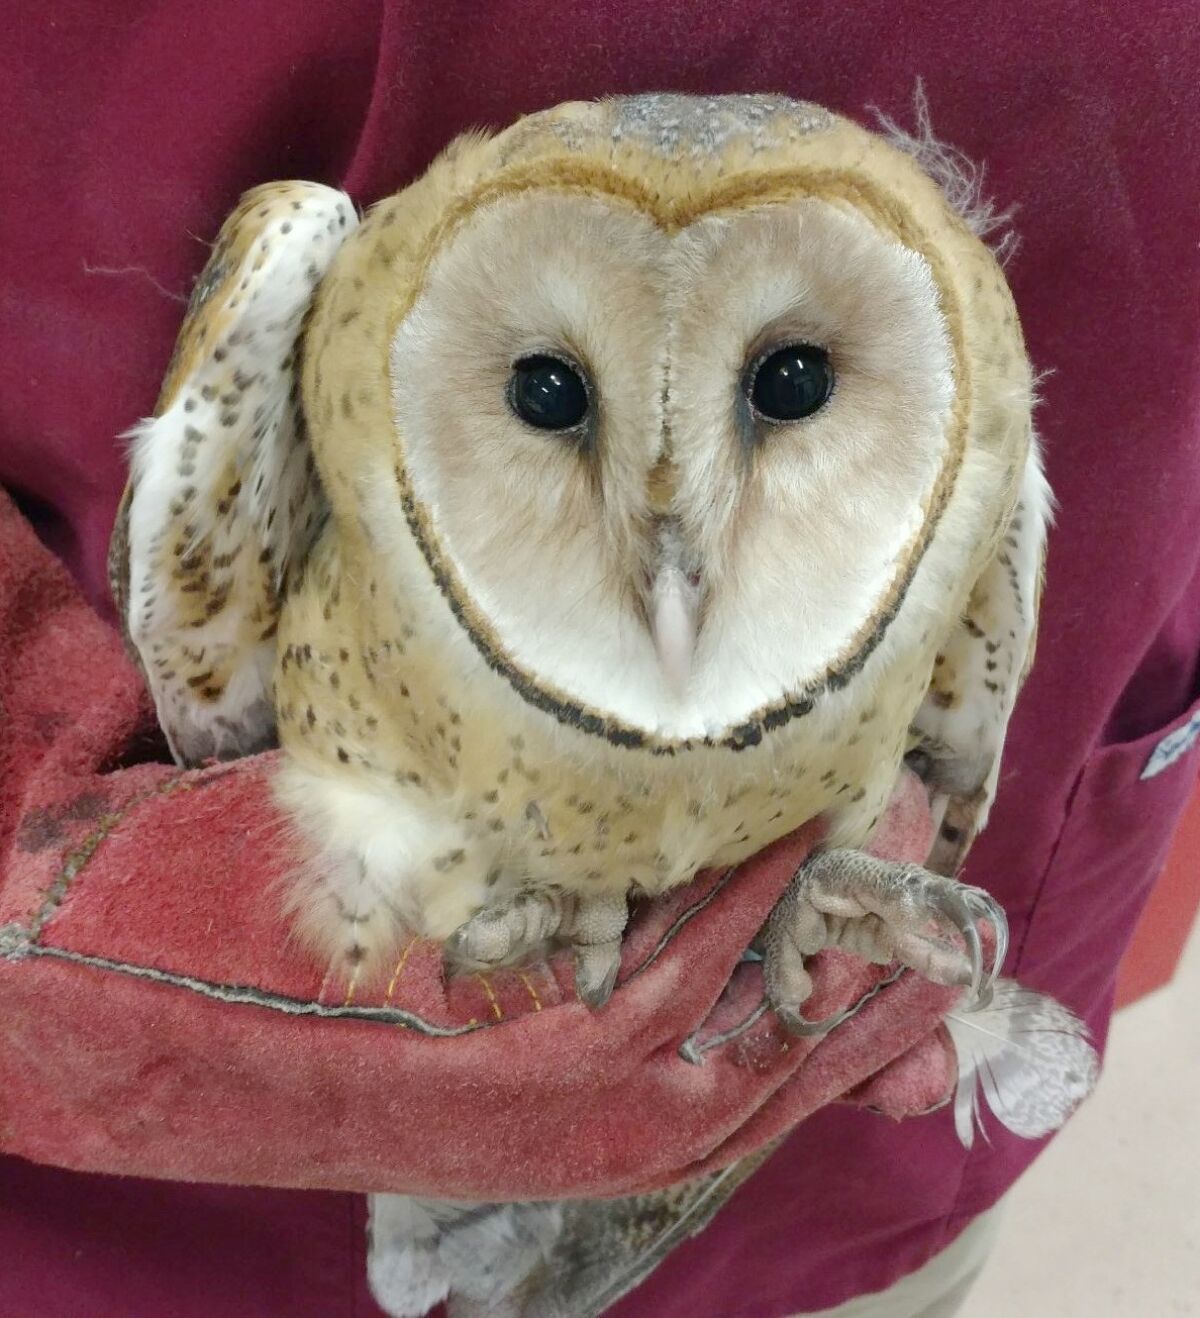 Barn owl patients are among the most common owl species seen at the Wildlife center